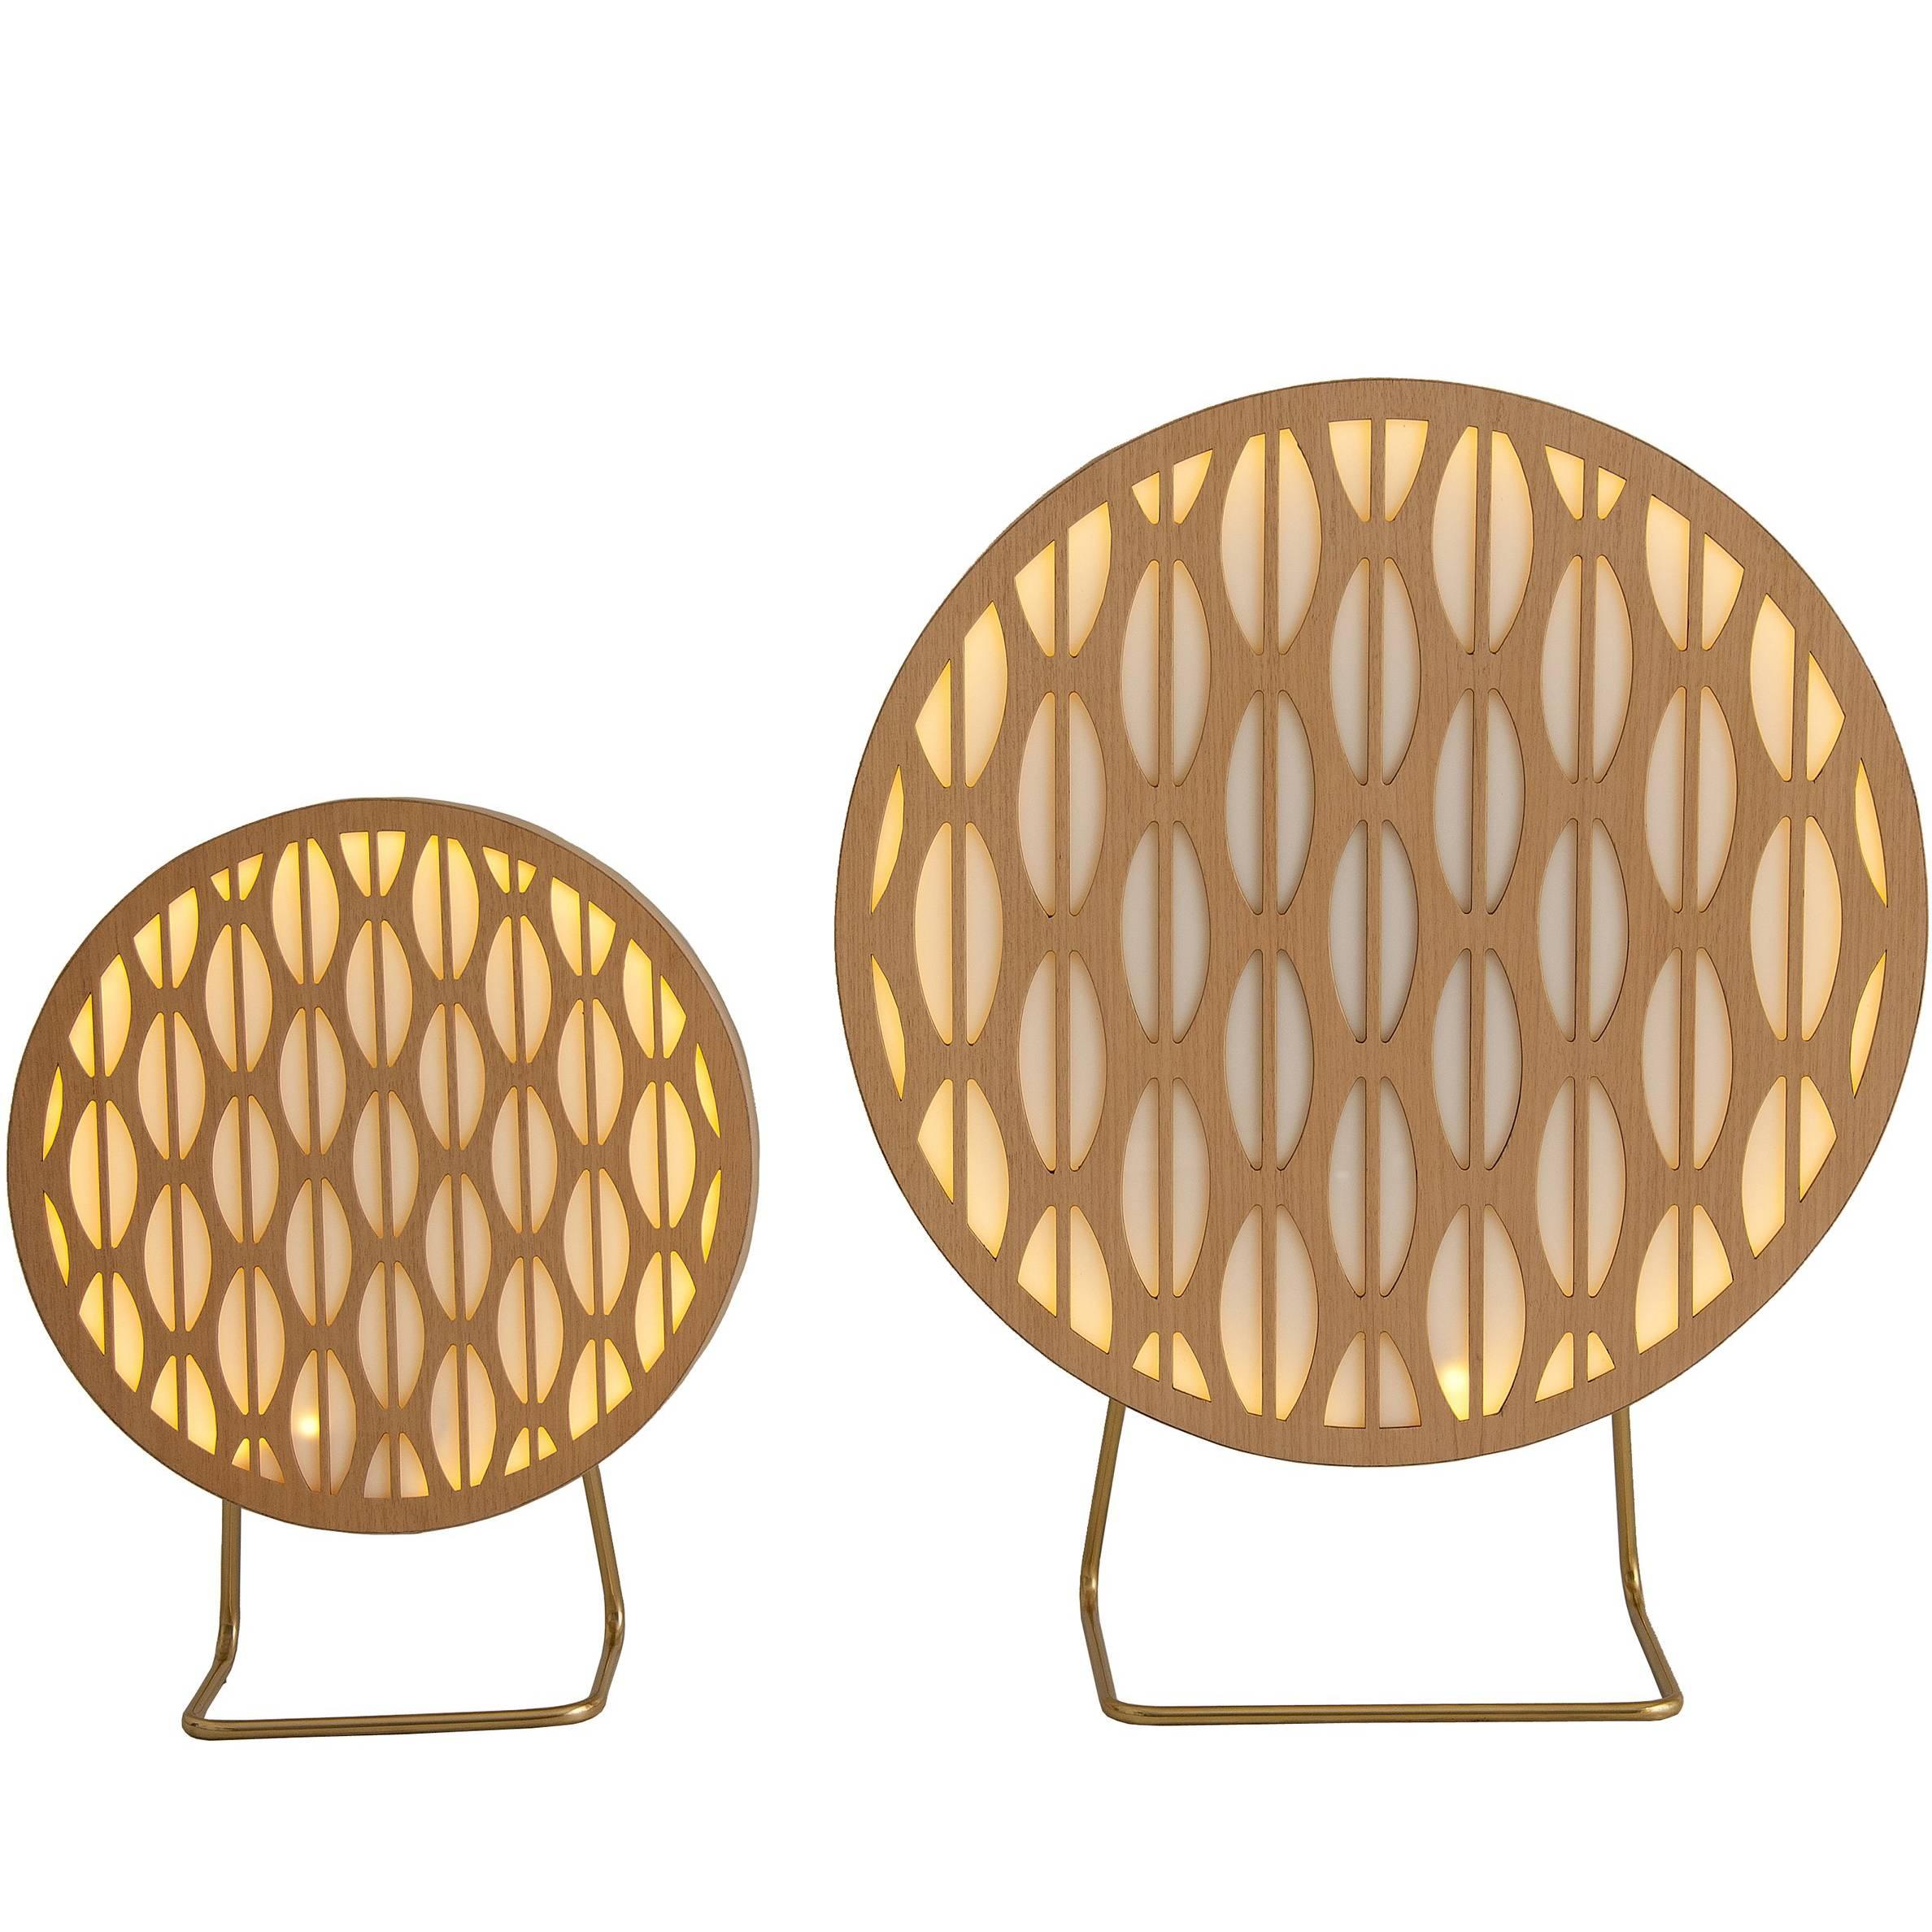 Small Pirulito Brazilian Contemporary Graphic Pattern Wood Table Lamp by Lattoog